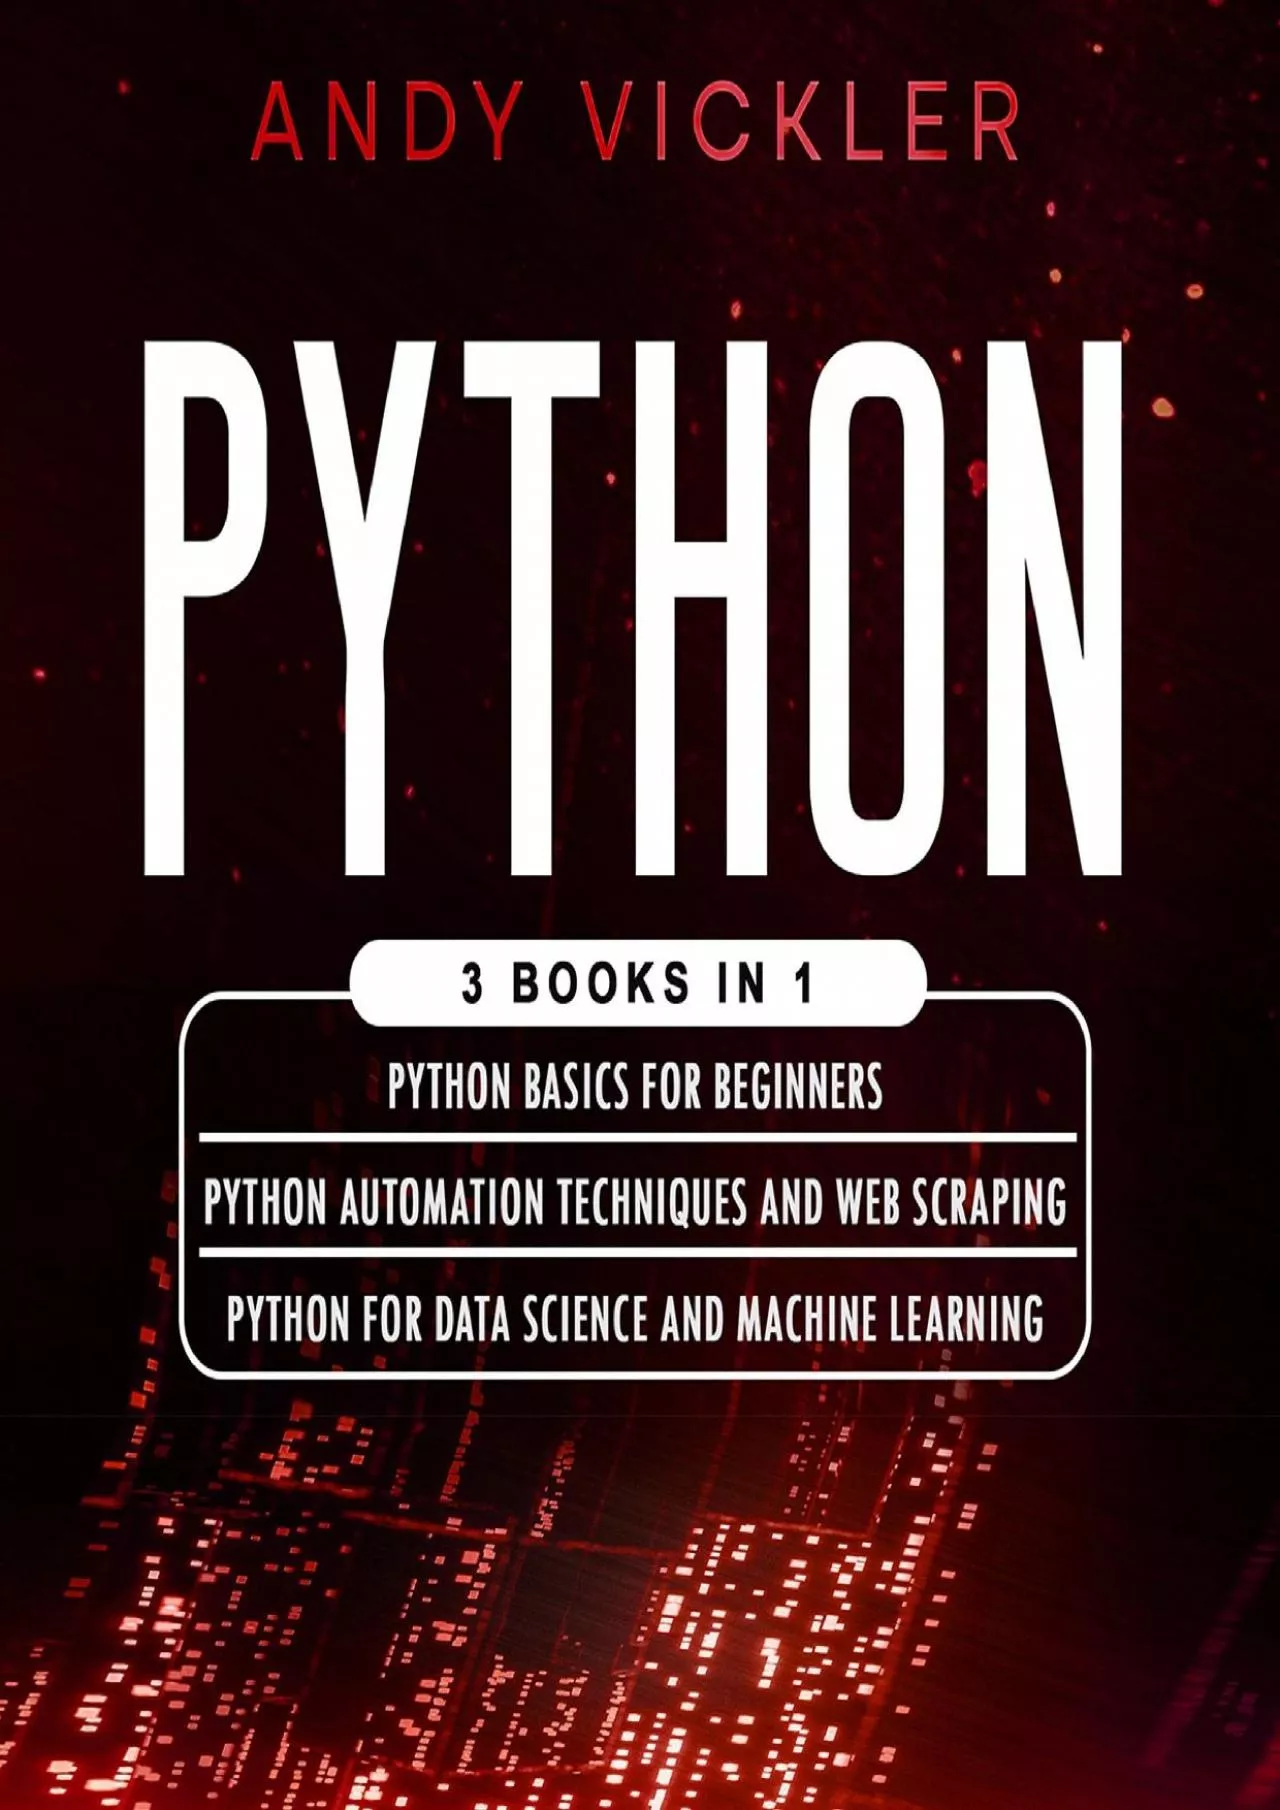 [BEST]-Python: 3 Books in 1: Python Basics for Beginners + Python Automation Techniques